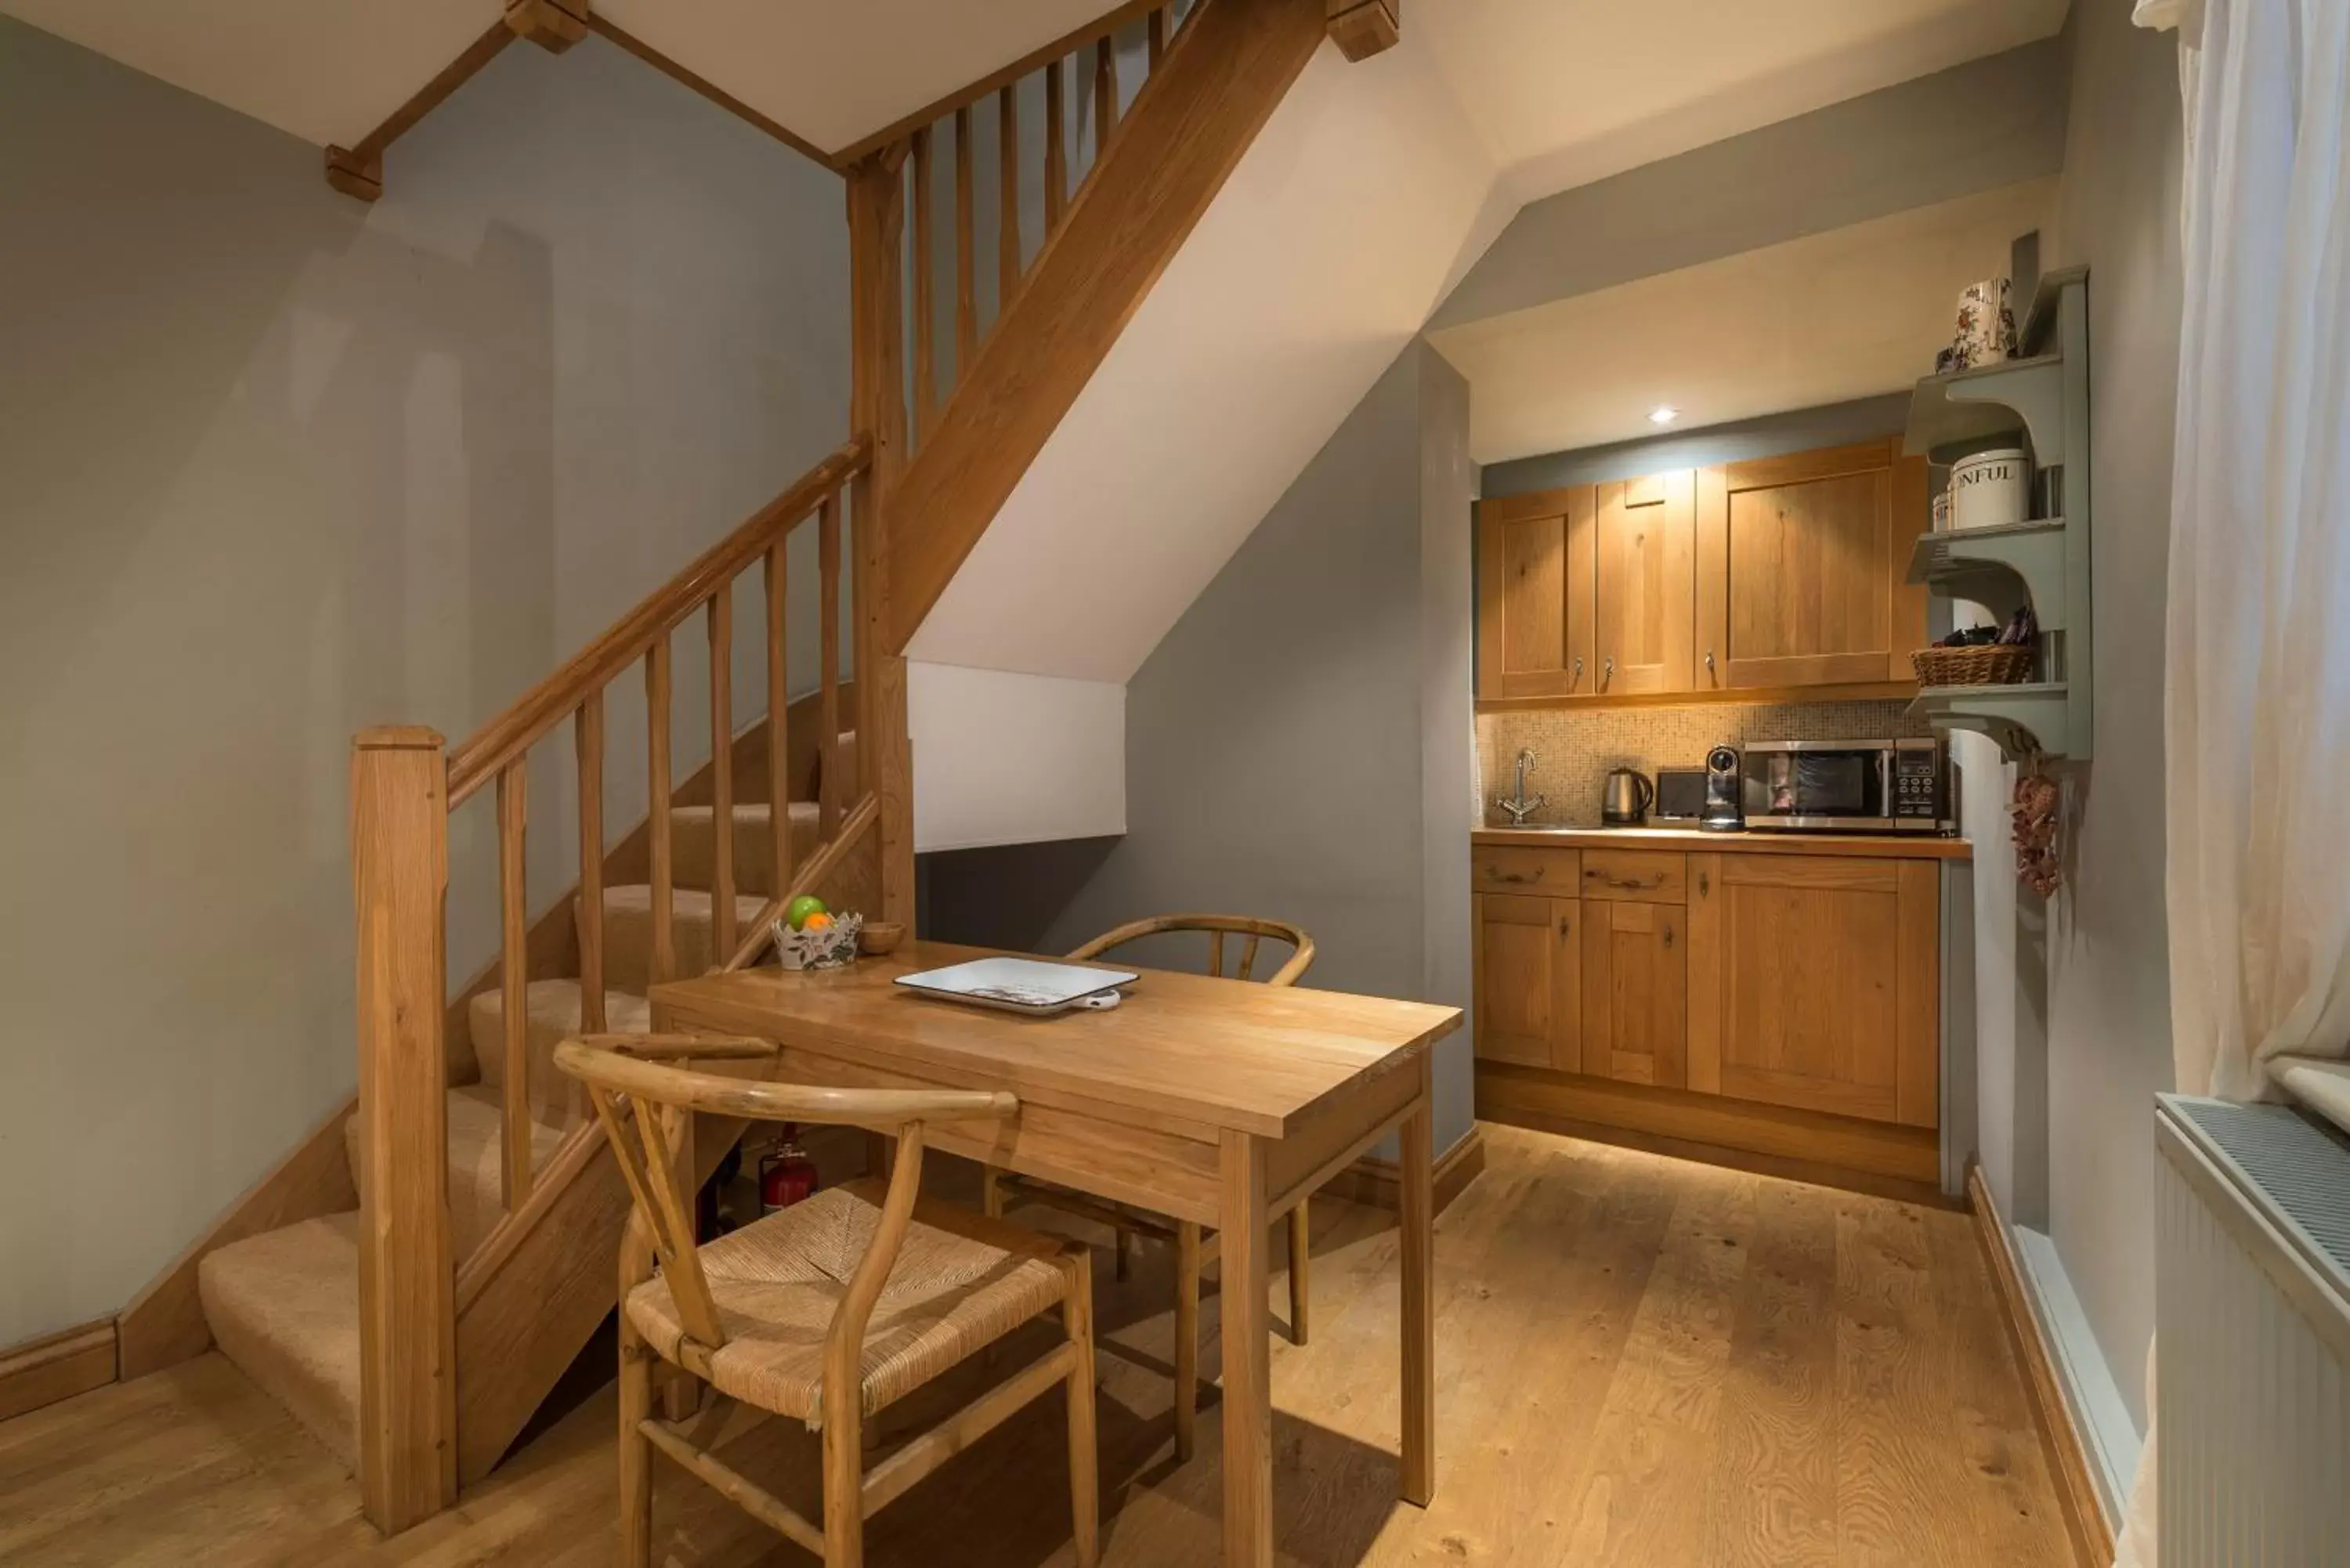 Kitchen or kitchenette, Dining Area in The Feathers Hotel, Ledbury, Herefordshire